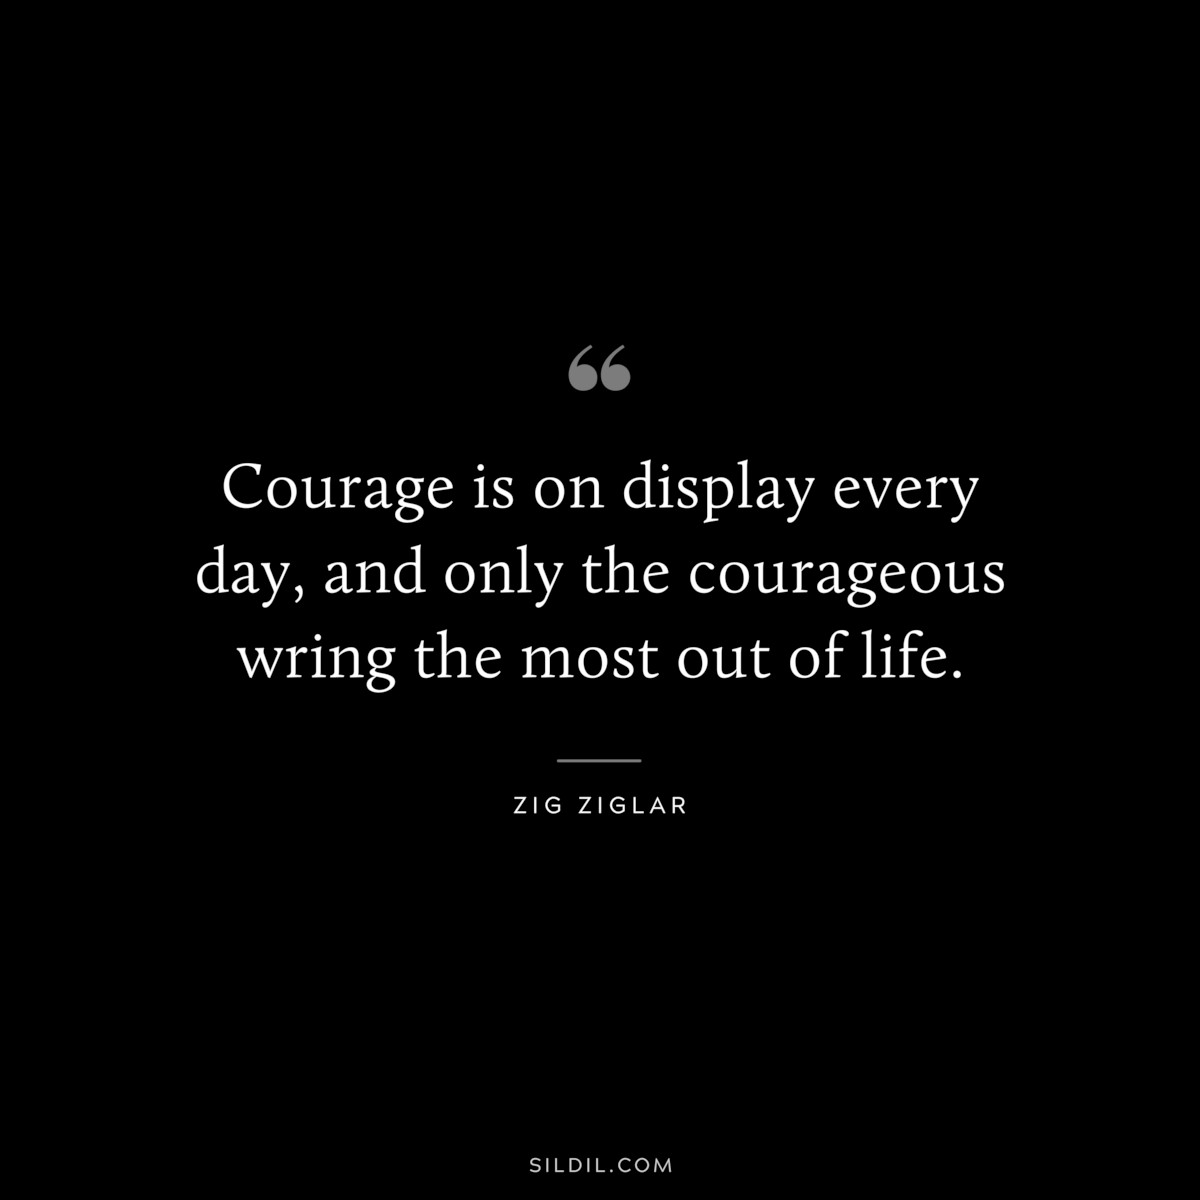 Courage is on display every day, and only the courageous wring the most out of life. ― Zig Ziglar